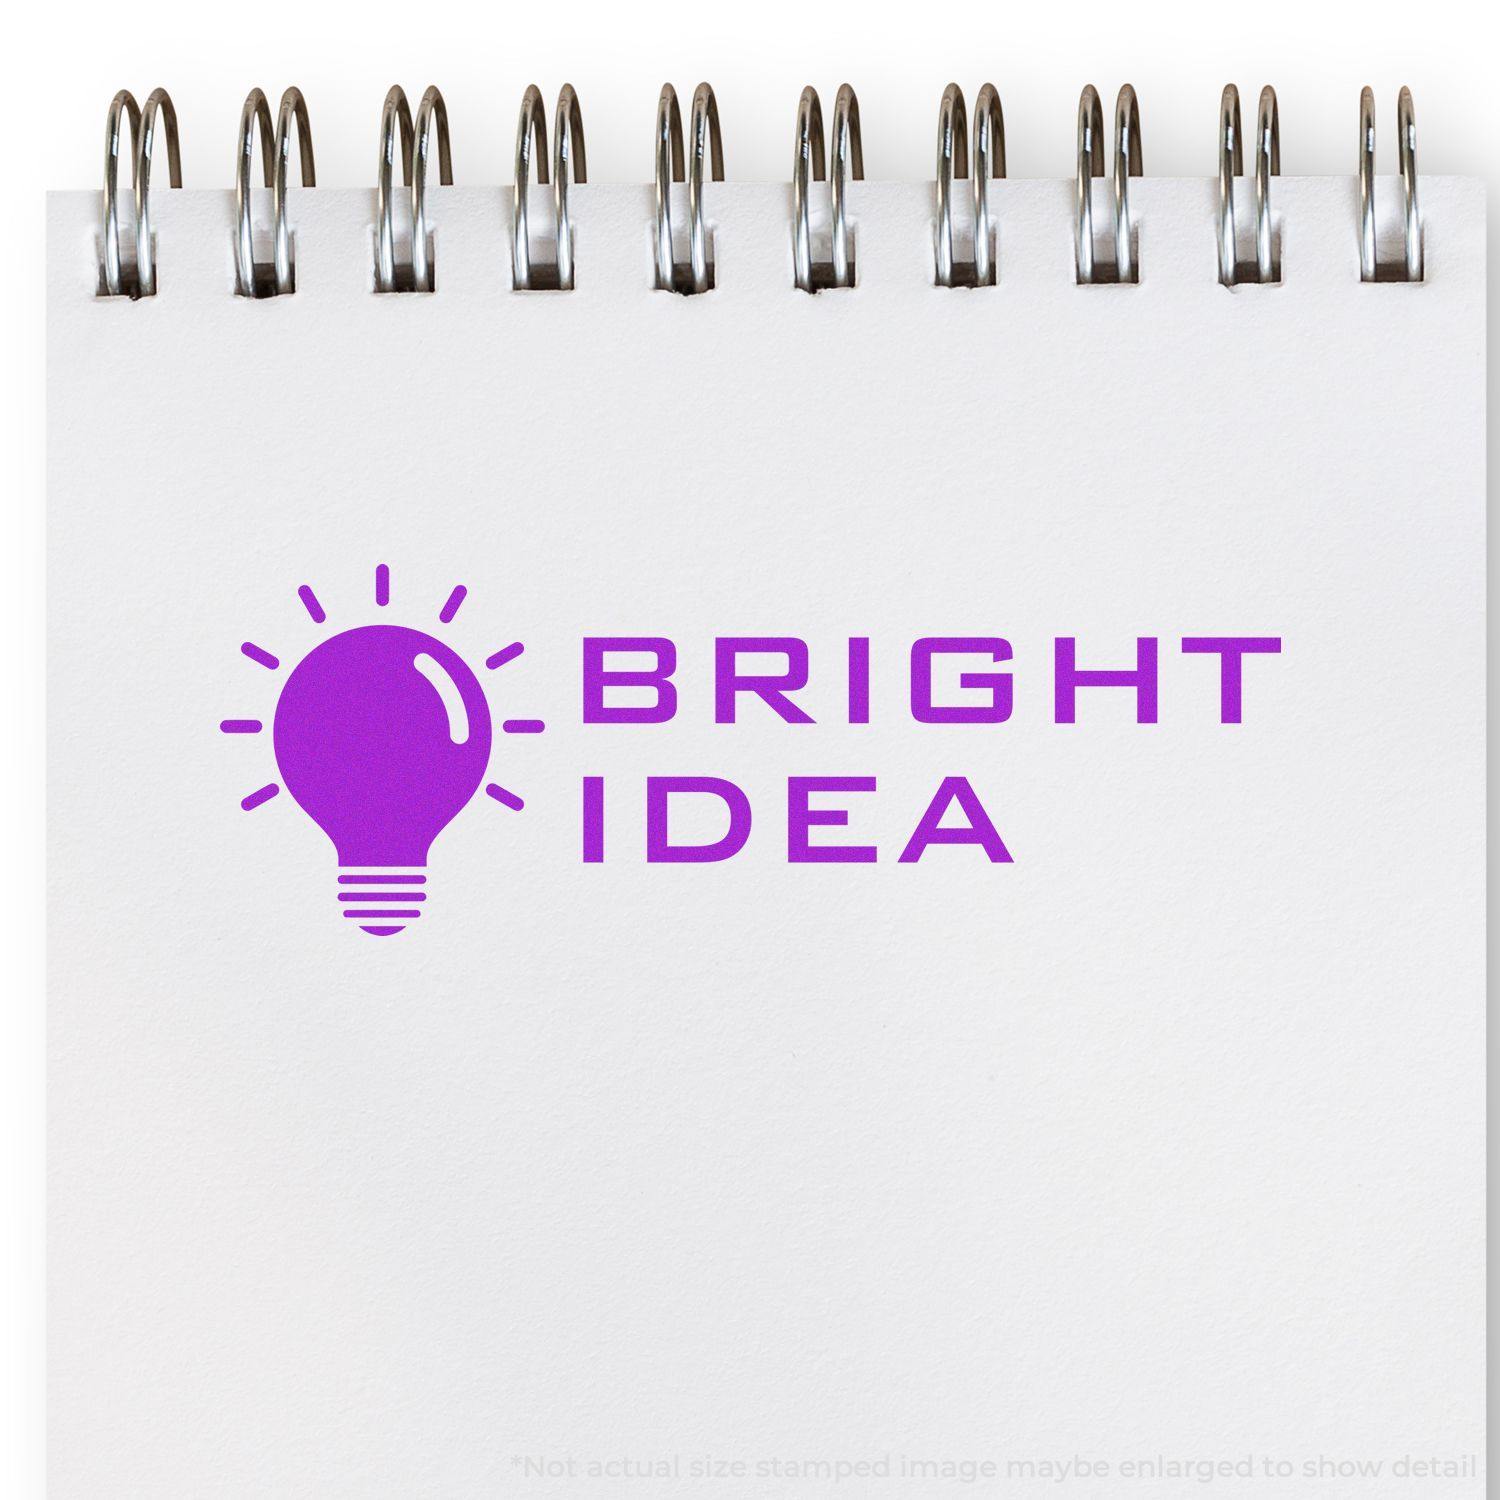 A stock office rubber stamp with a stamped image showing how the text "BRIGHT IDEA" in tech-style font with an image of a glowing lightbulb is displayed after stamping.